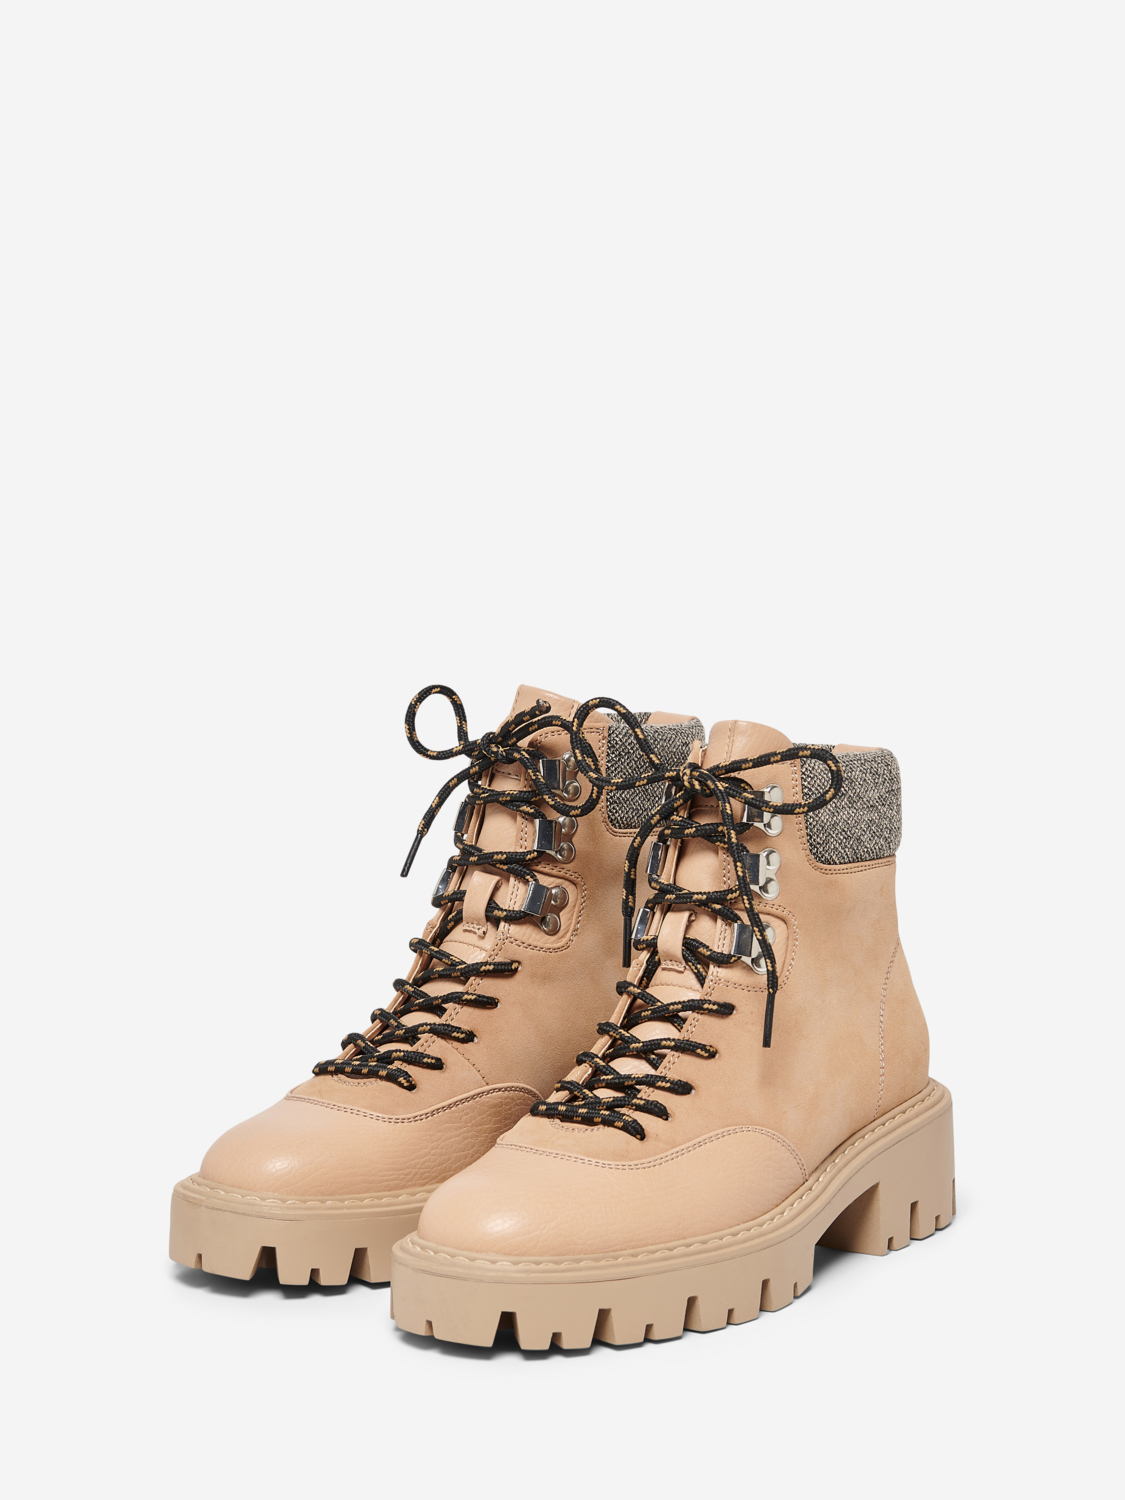 FINAL SALE - Betty faux leather lace-up boots, CAMEL, large